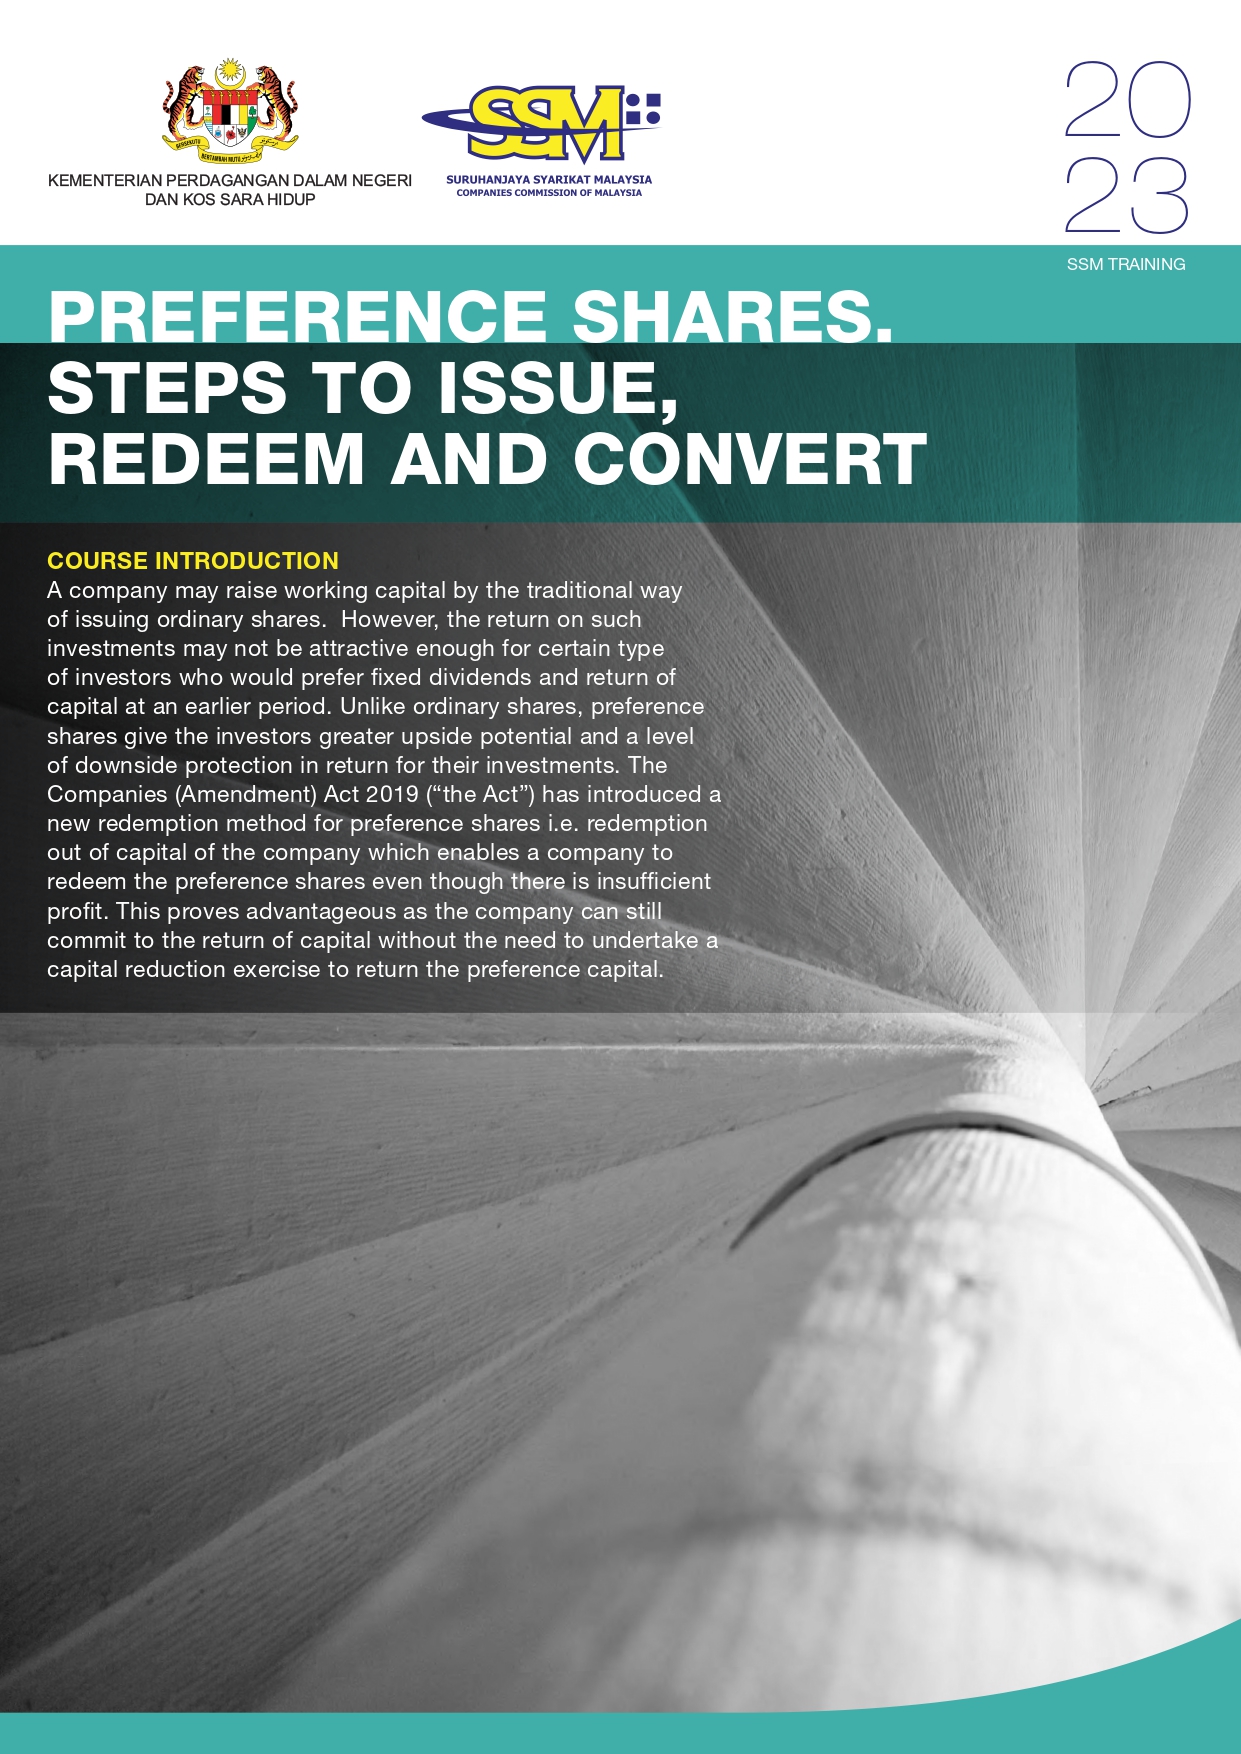 PREFERENCE SHARES STEPS TO ISSUE, REDEEM AND CONVERT_page-0001.jpg